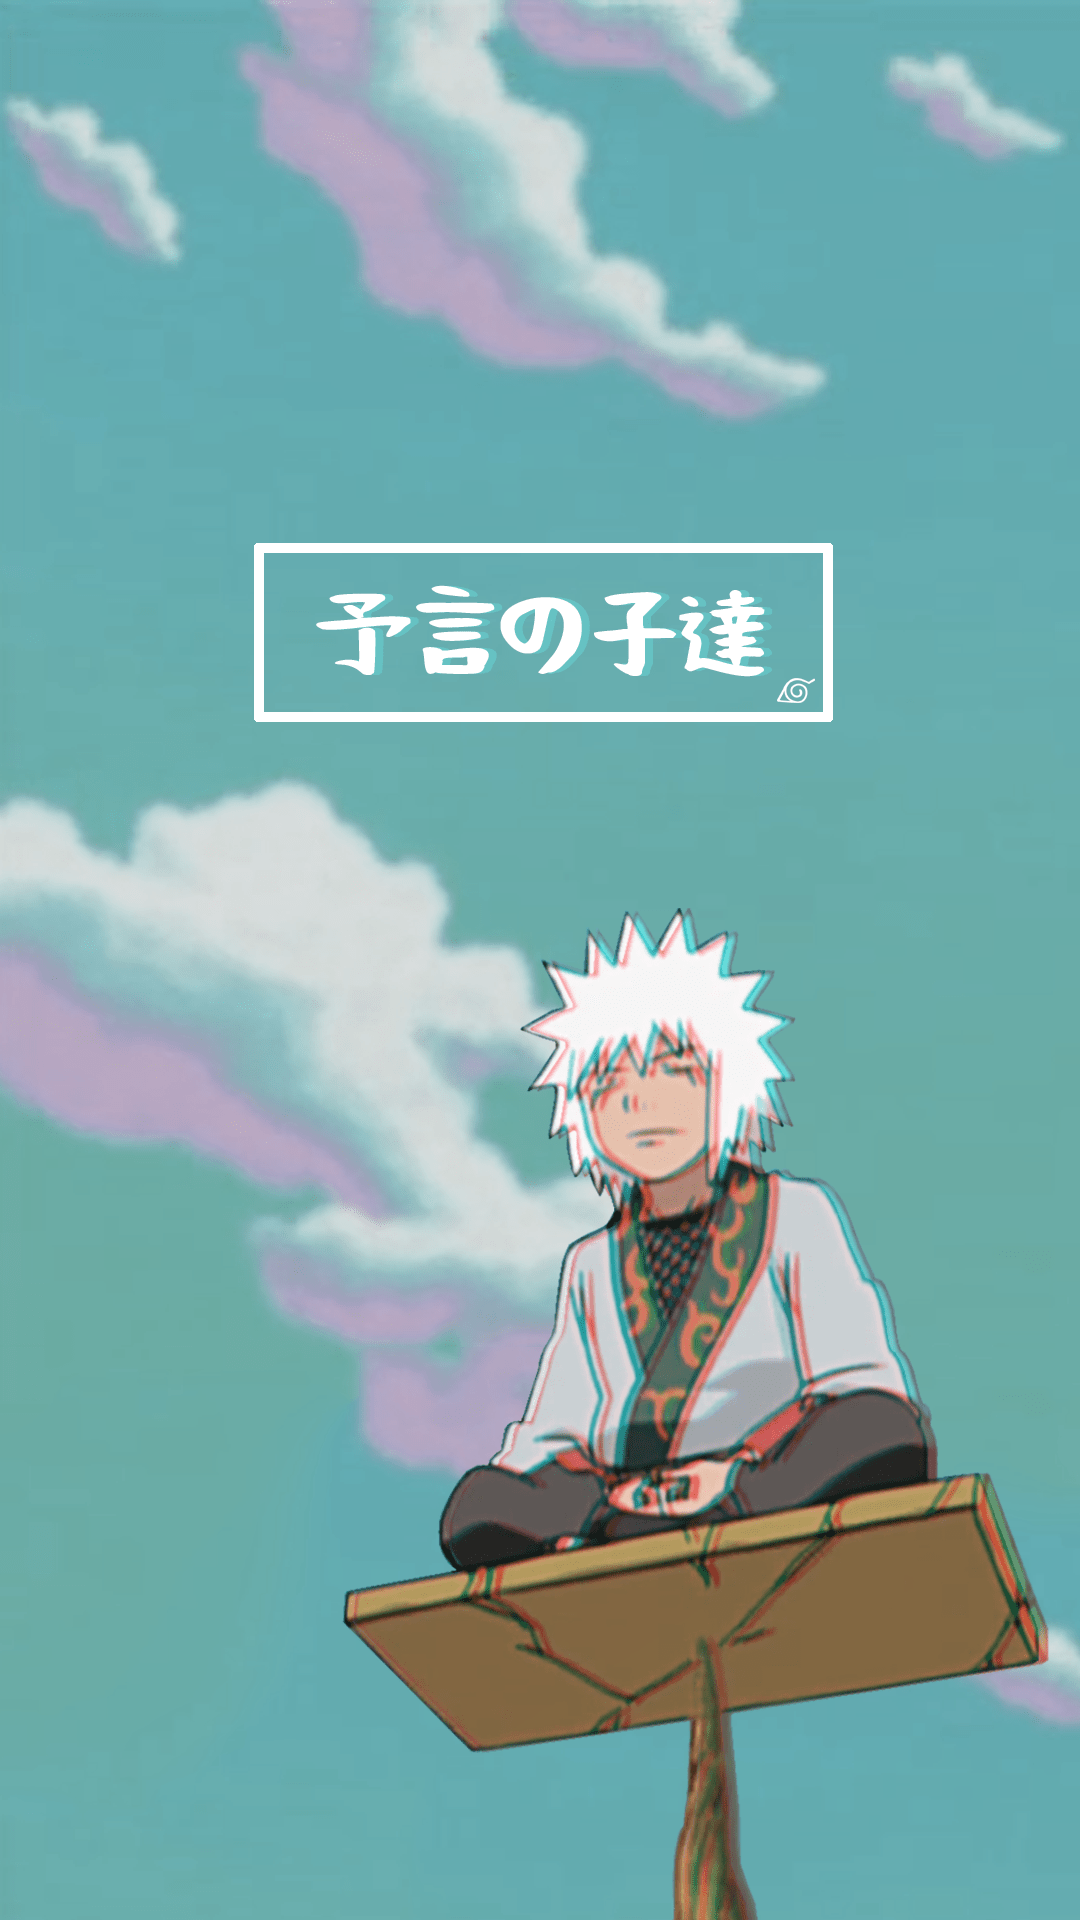 Aesthetic anime wallpaper of Jiraiya from Naruto sitting on a wooden box - Simple, Naruto